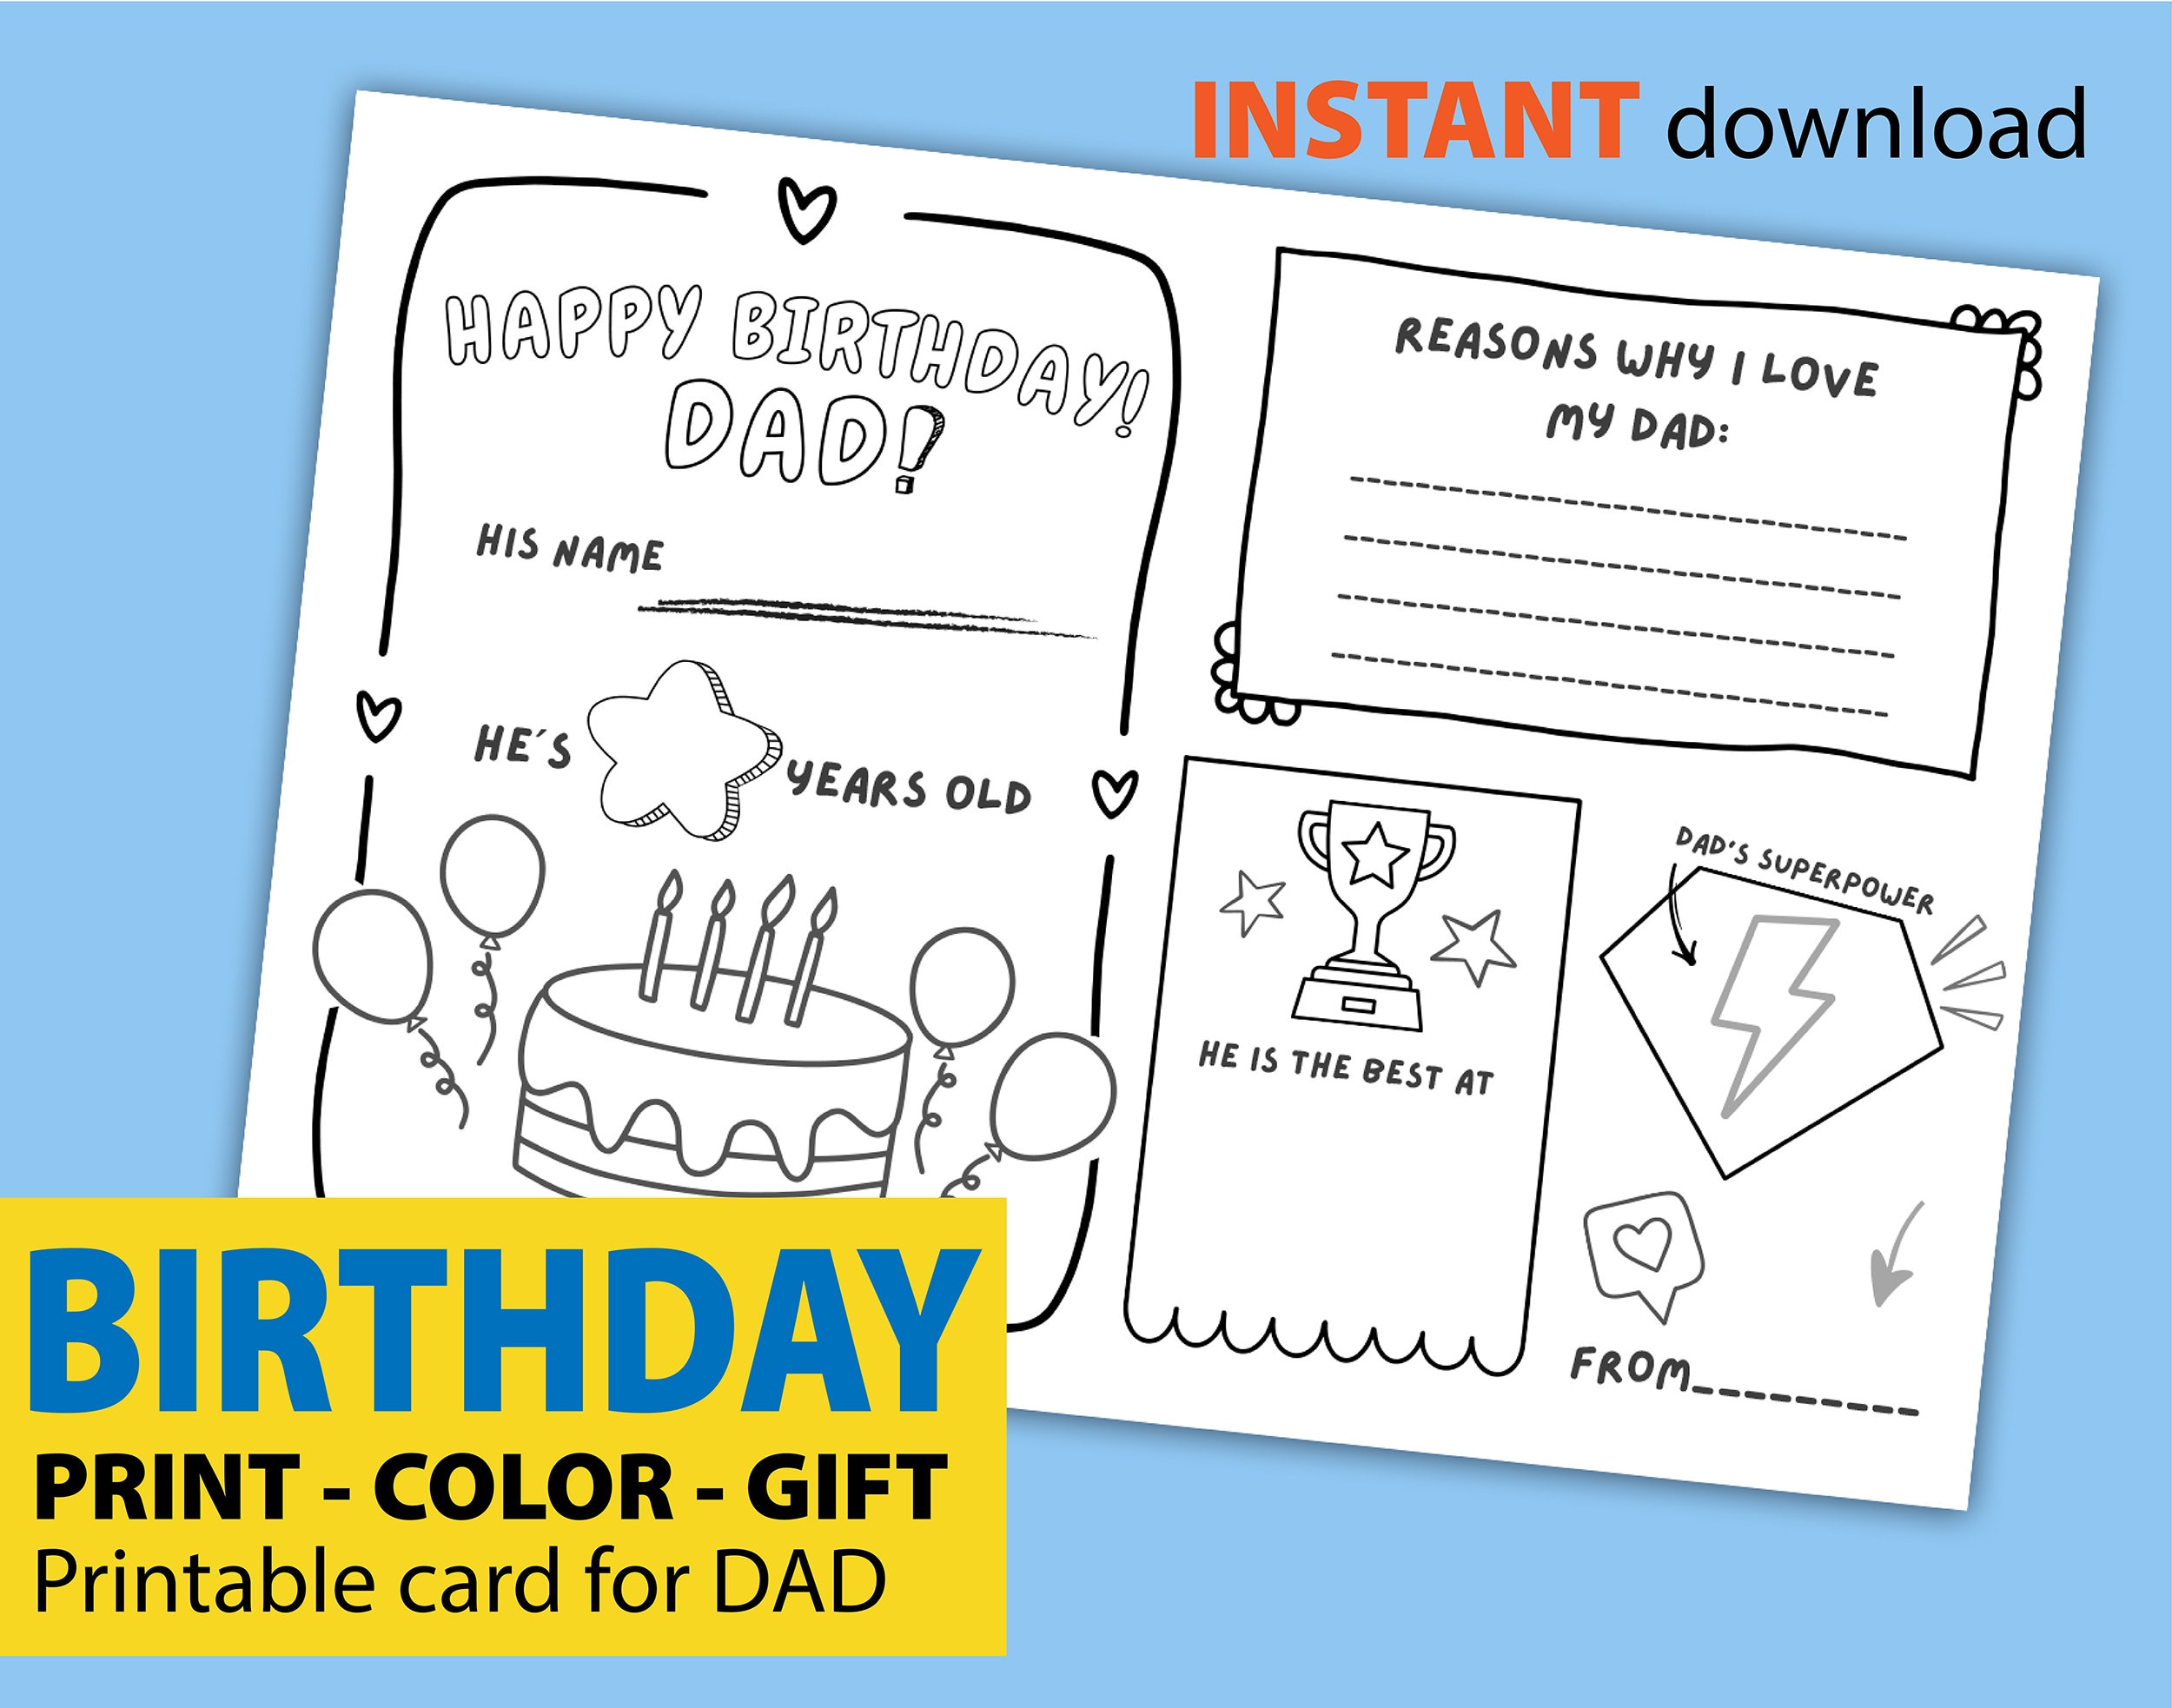 happy-birthday-dad-coloring-page-printable-all-about-dad-fill-in-template-father-s-birthday